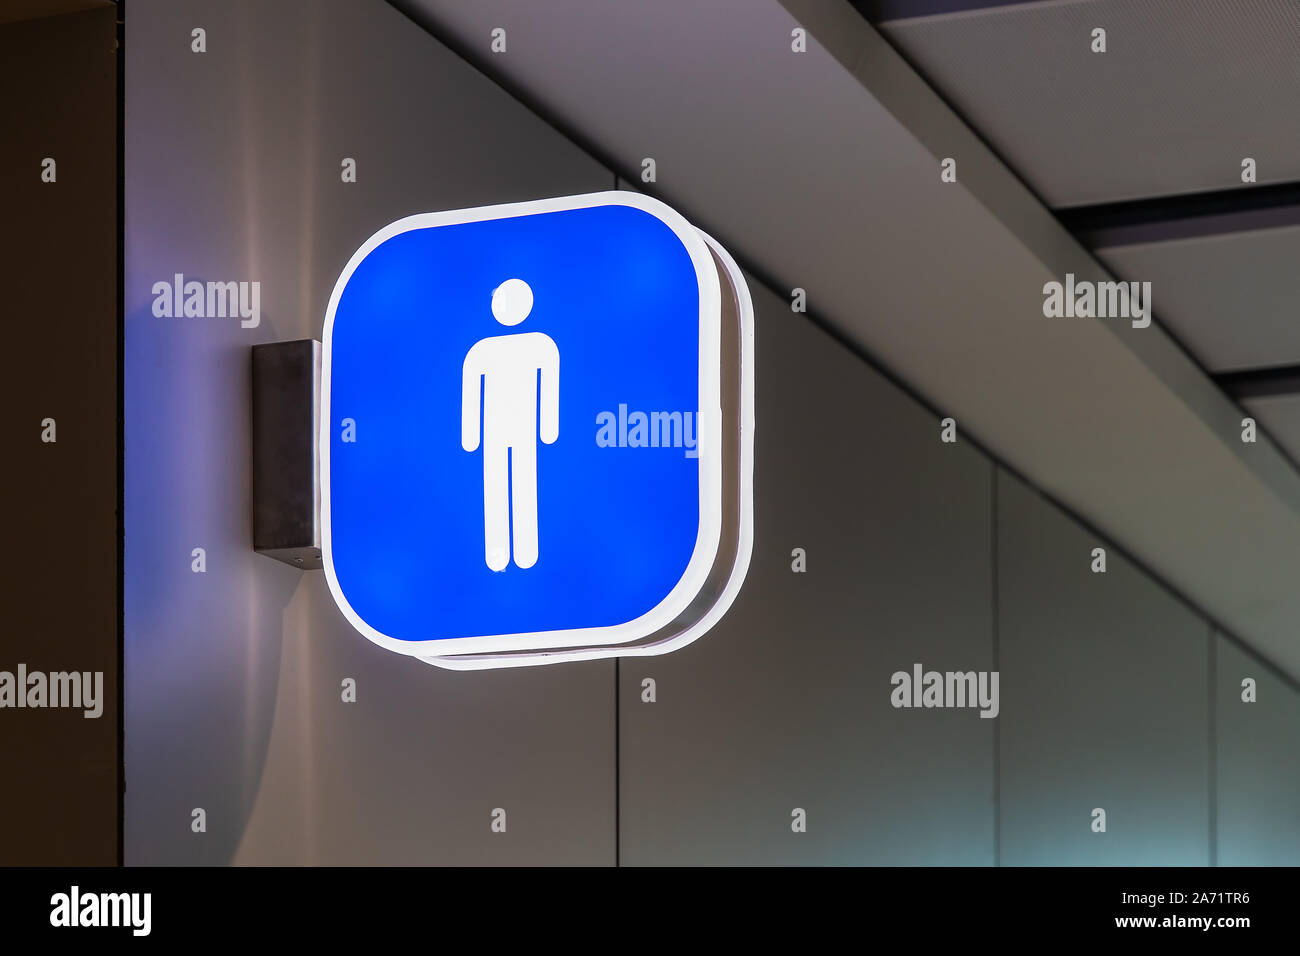 ISTANBUL, Turkey august 2019: international airport restroom sign for man hanging on the wall, pictogram in blue and white, background in colour Stock Photo